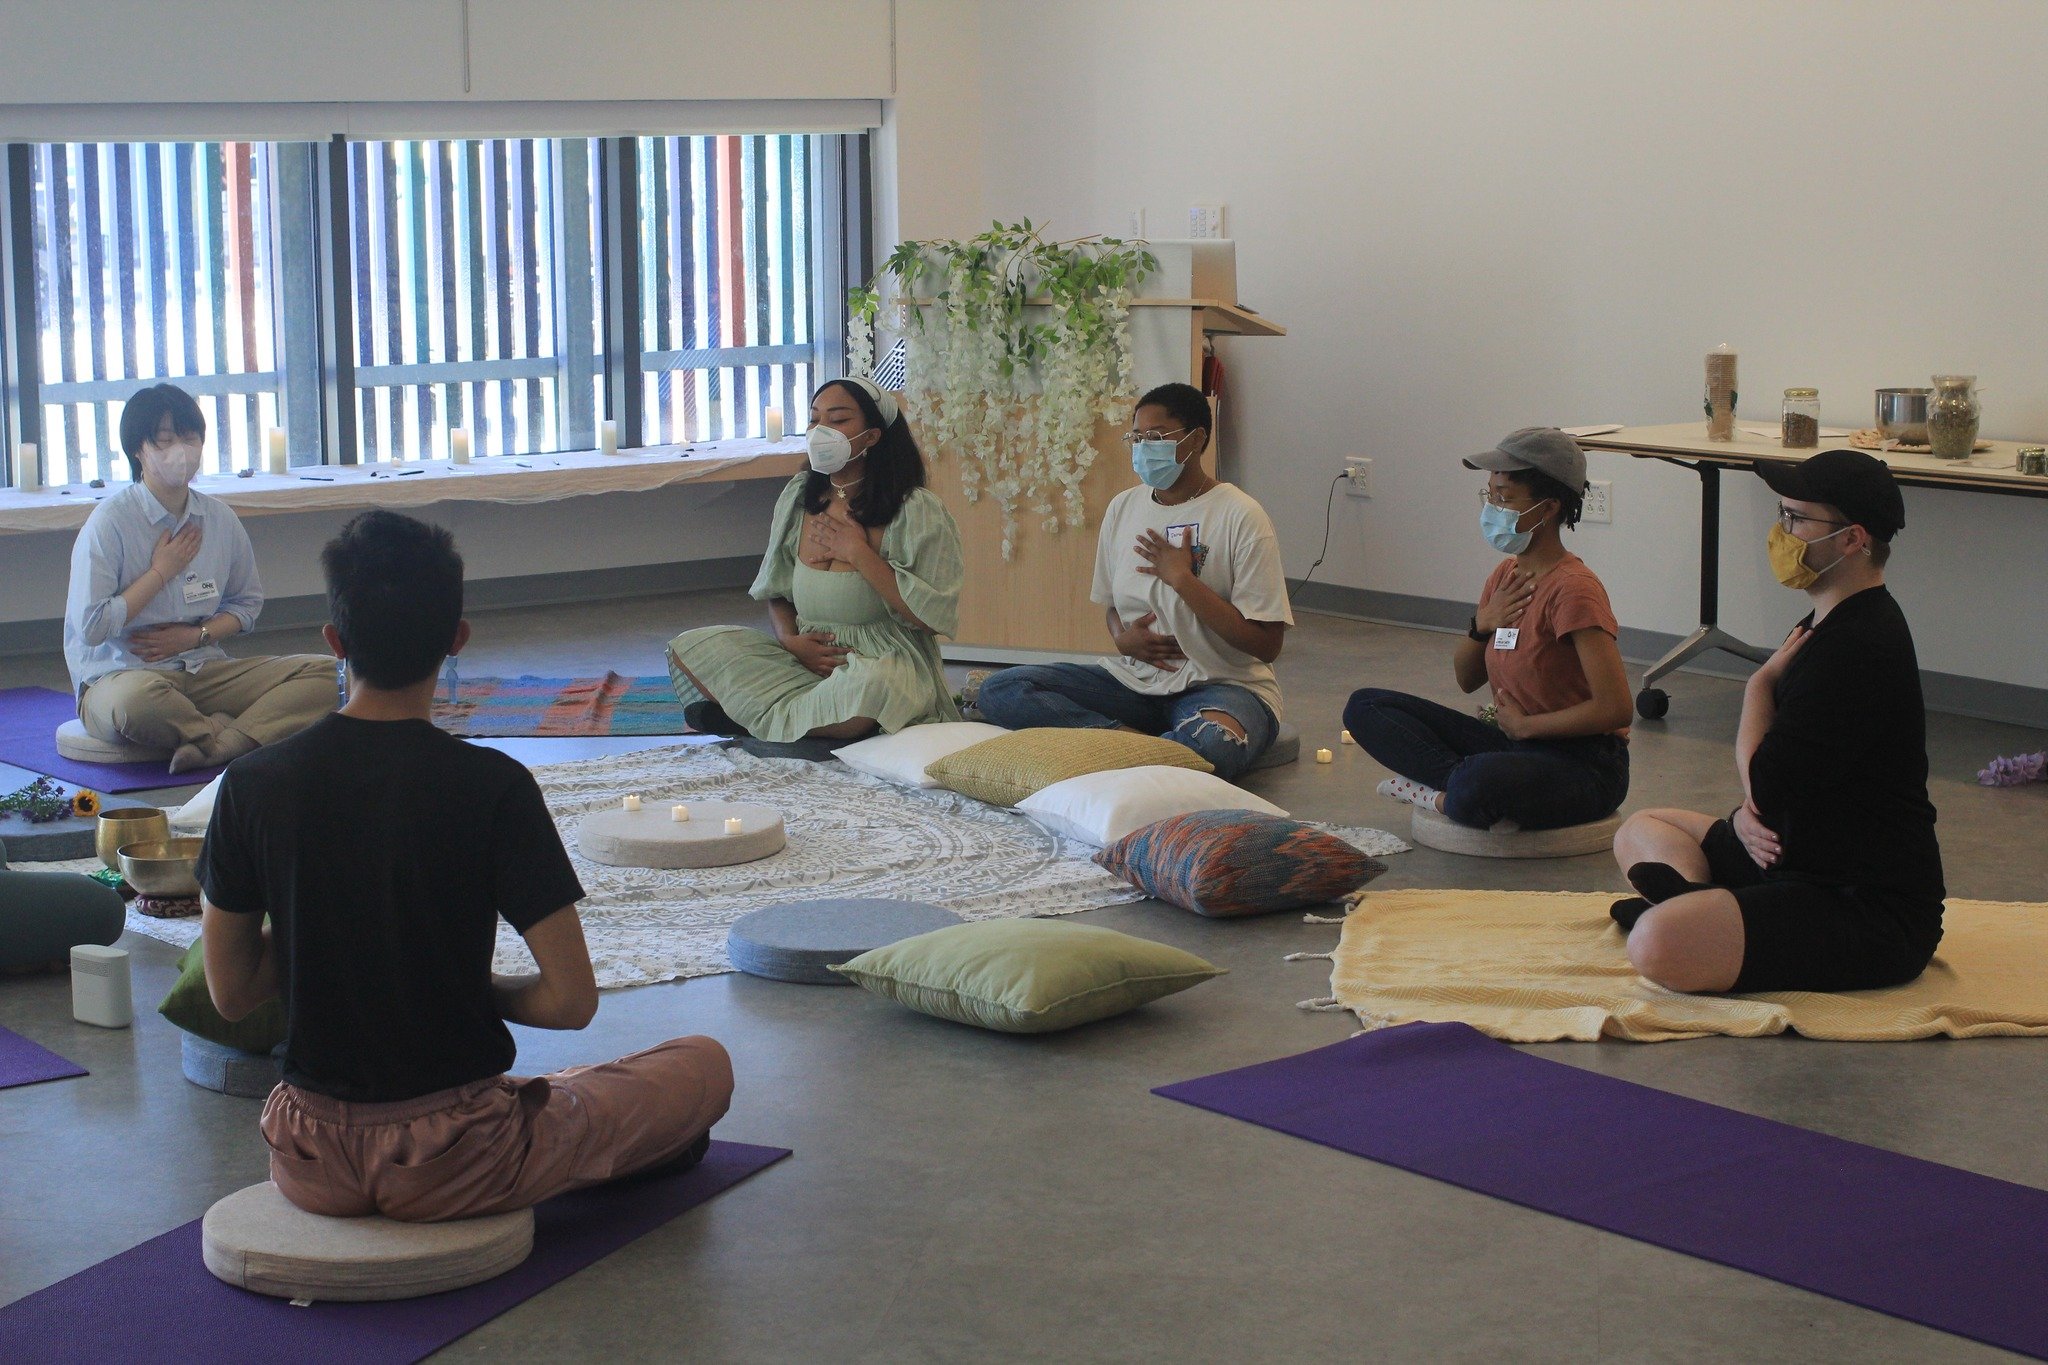 Branch Out With C1: Tranquility and Tea for Superhero Moms featuring Leela Yoga + Wellness Founder Marlene Boyette and Herbalism Artist Julissa Emile Boston Public Library, Roslindale Branch